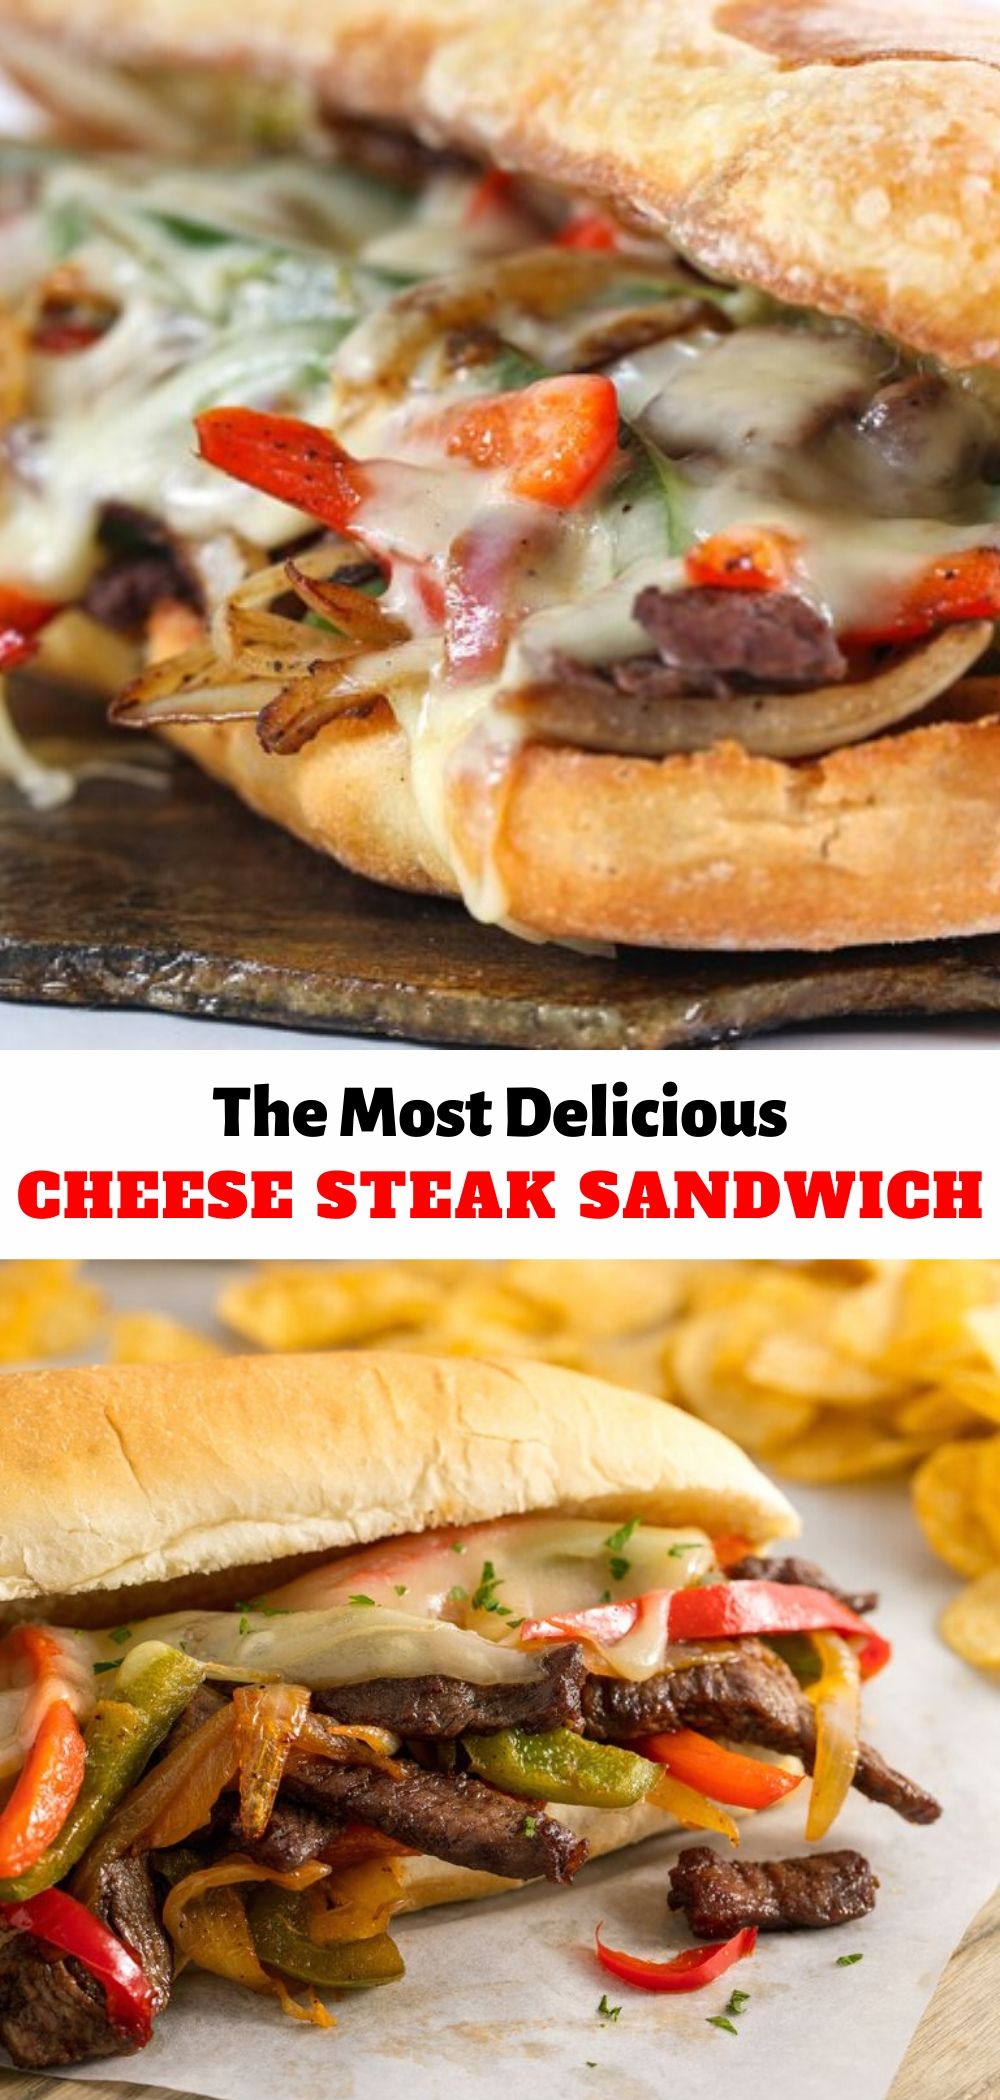 The Most Delicious Cheese Steak Sandwich